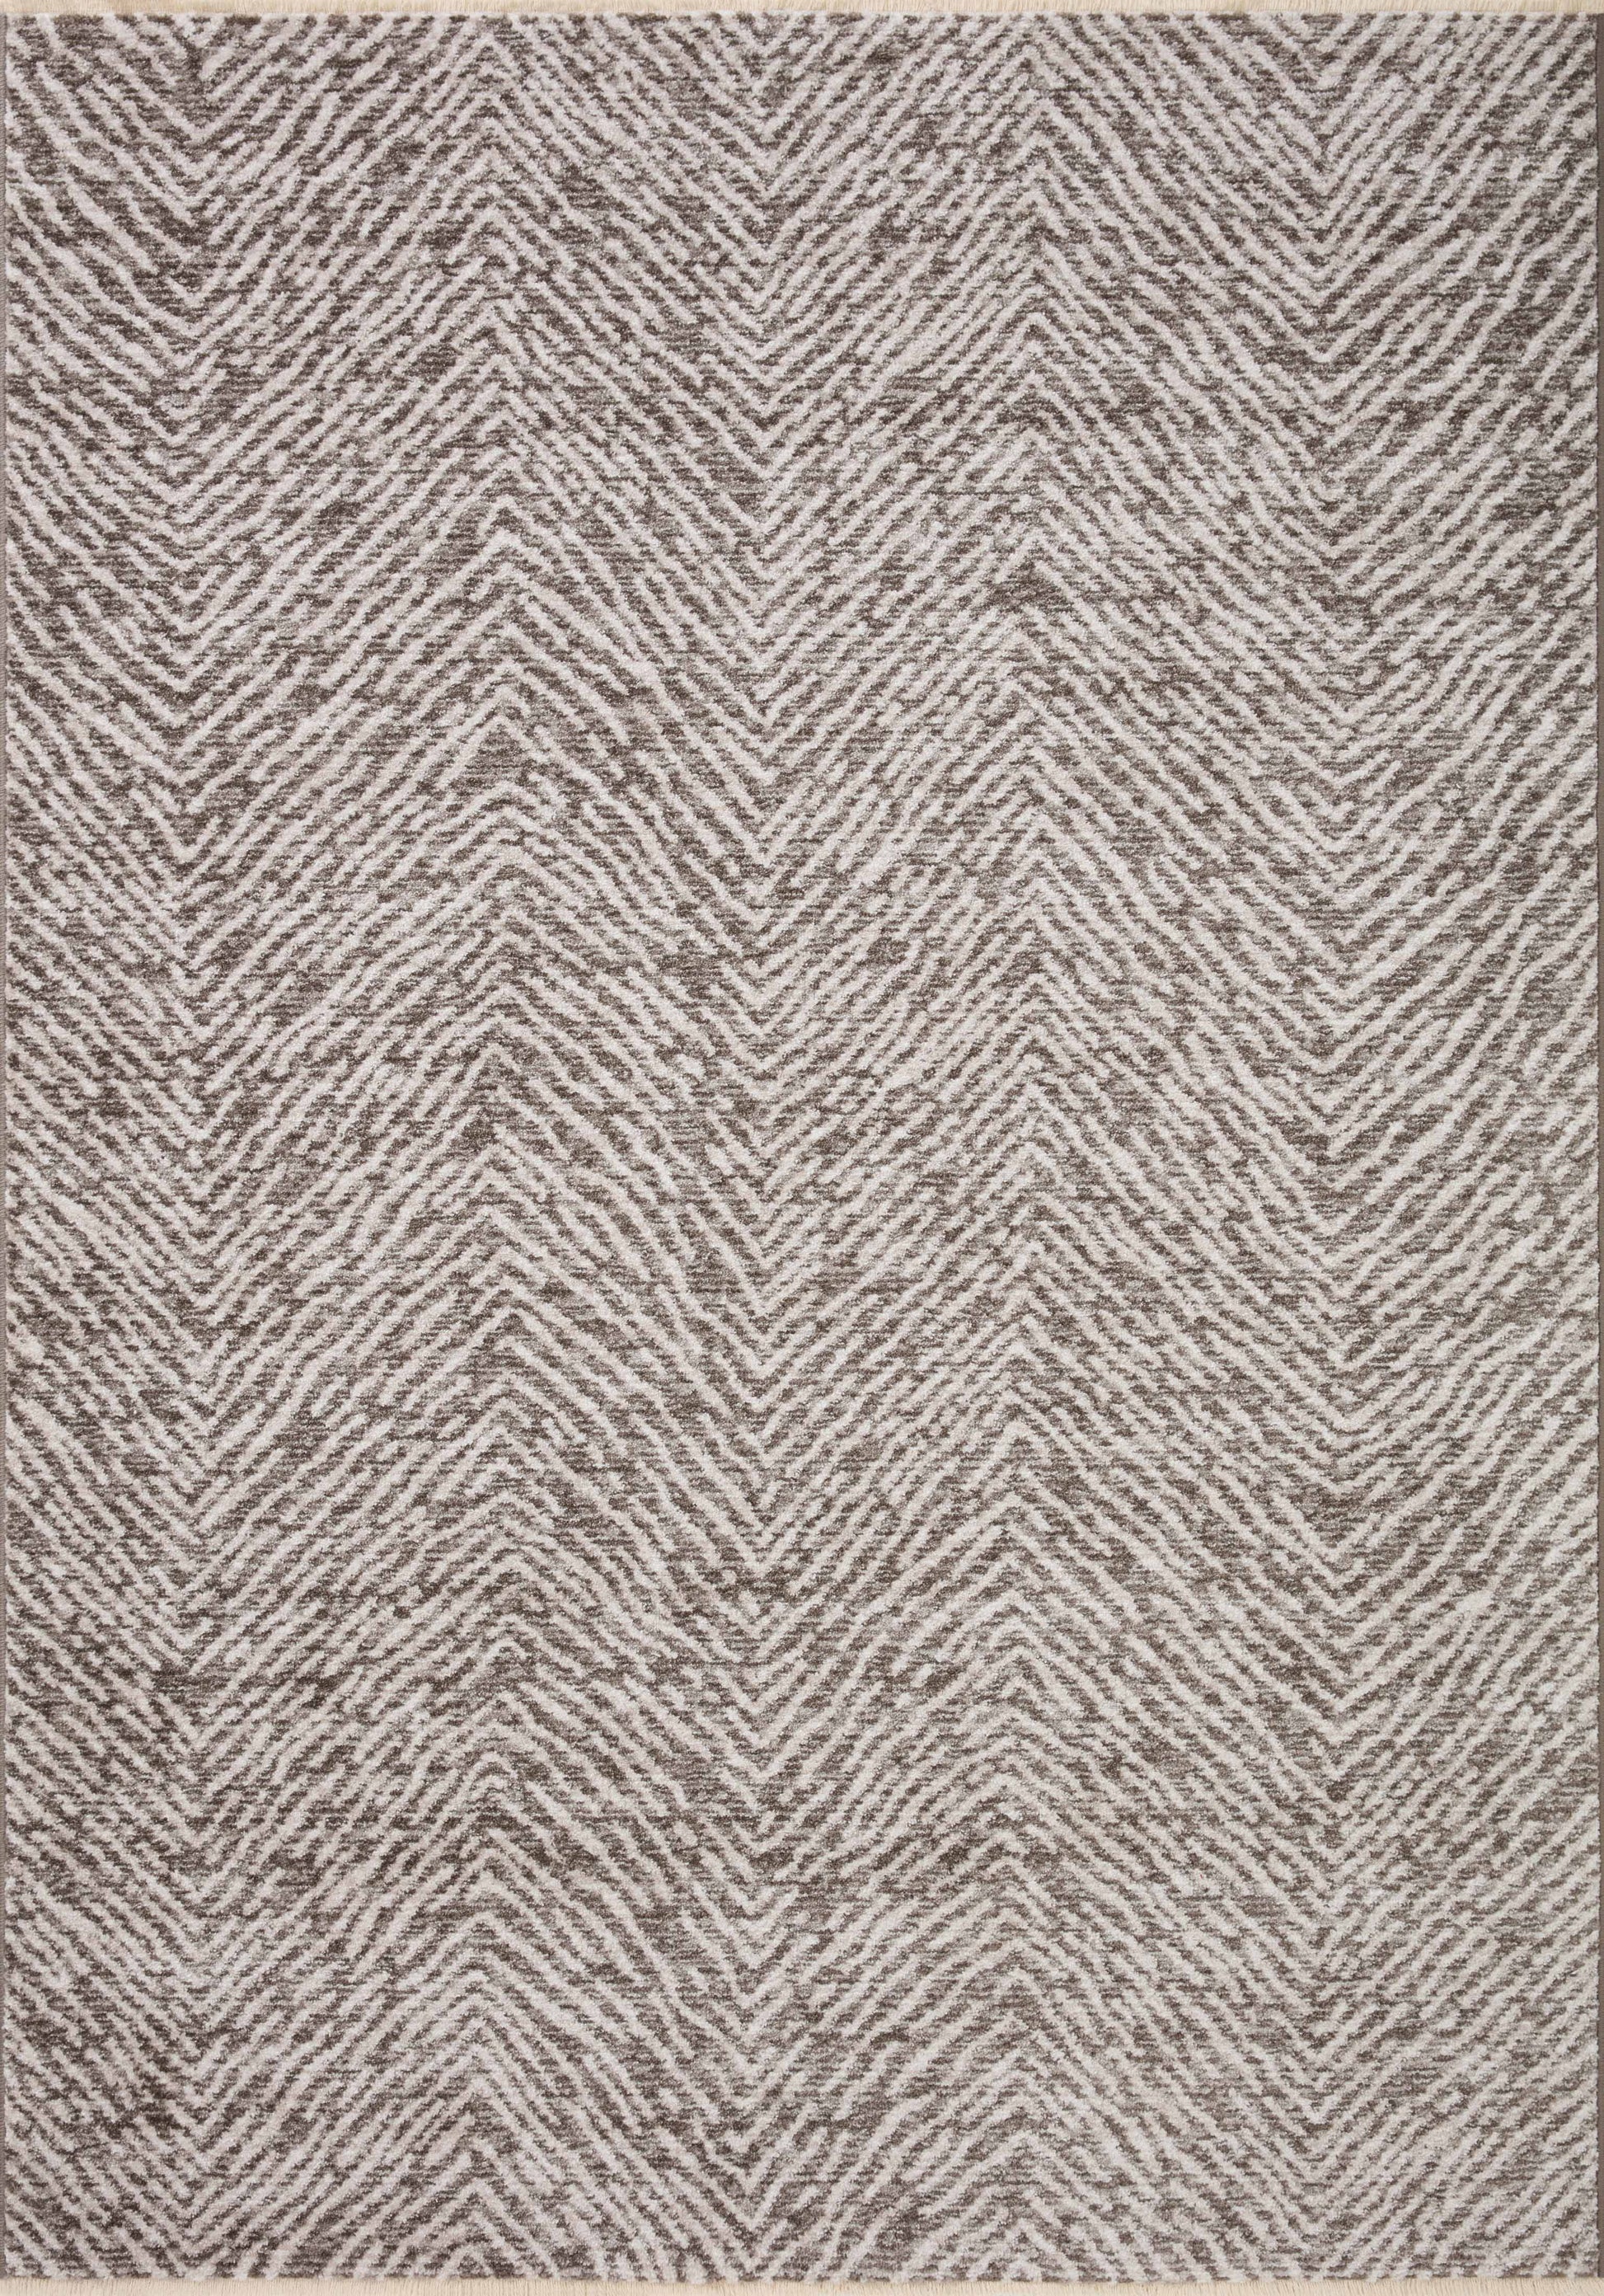 A picture of Loloi's Vance rug, in style VAN-10, color Taupe / Dove